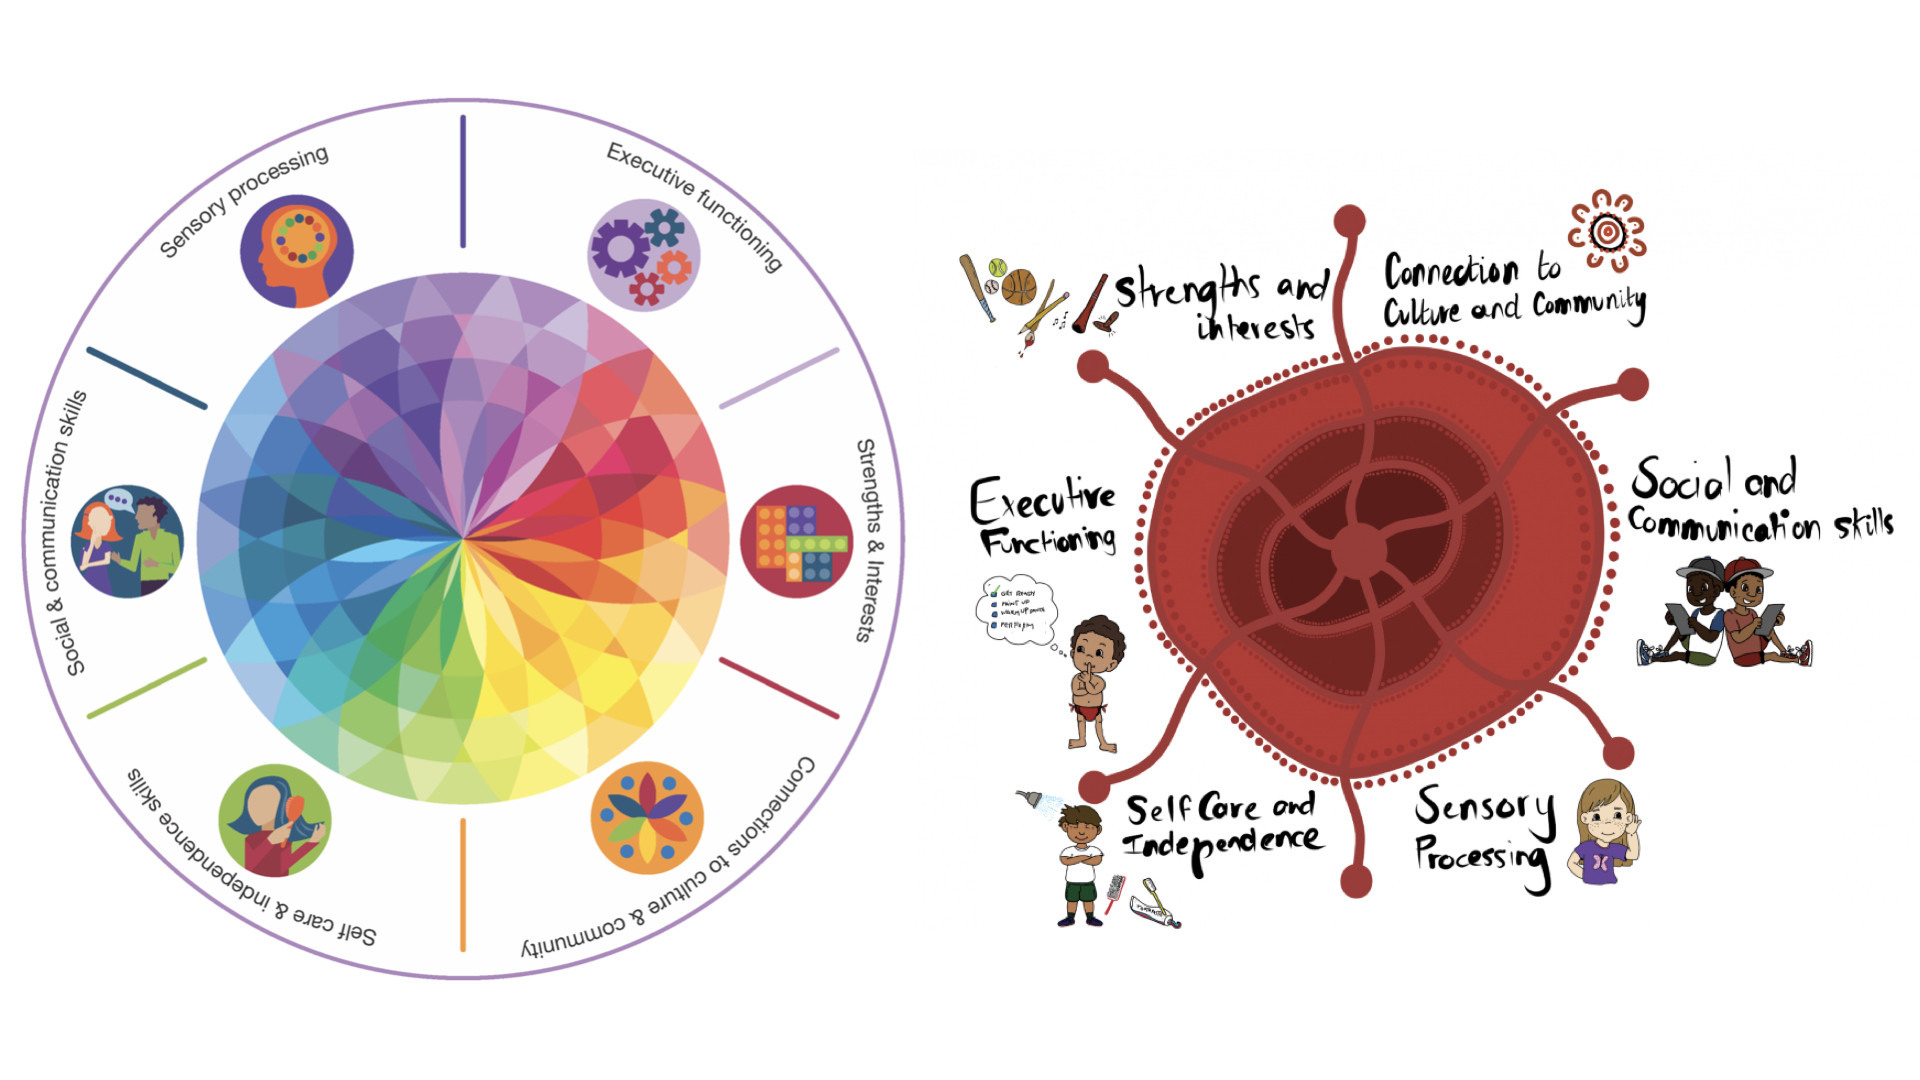 The Diversity Wheel and Story Circle